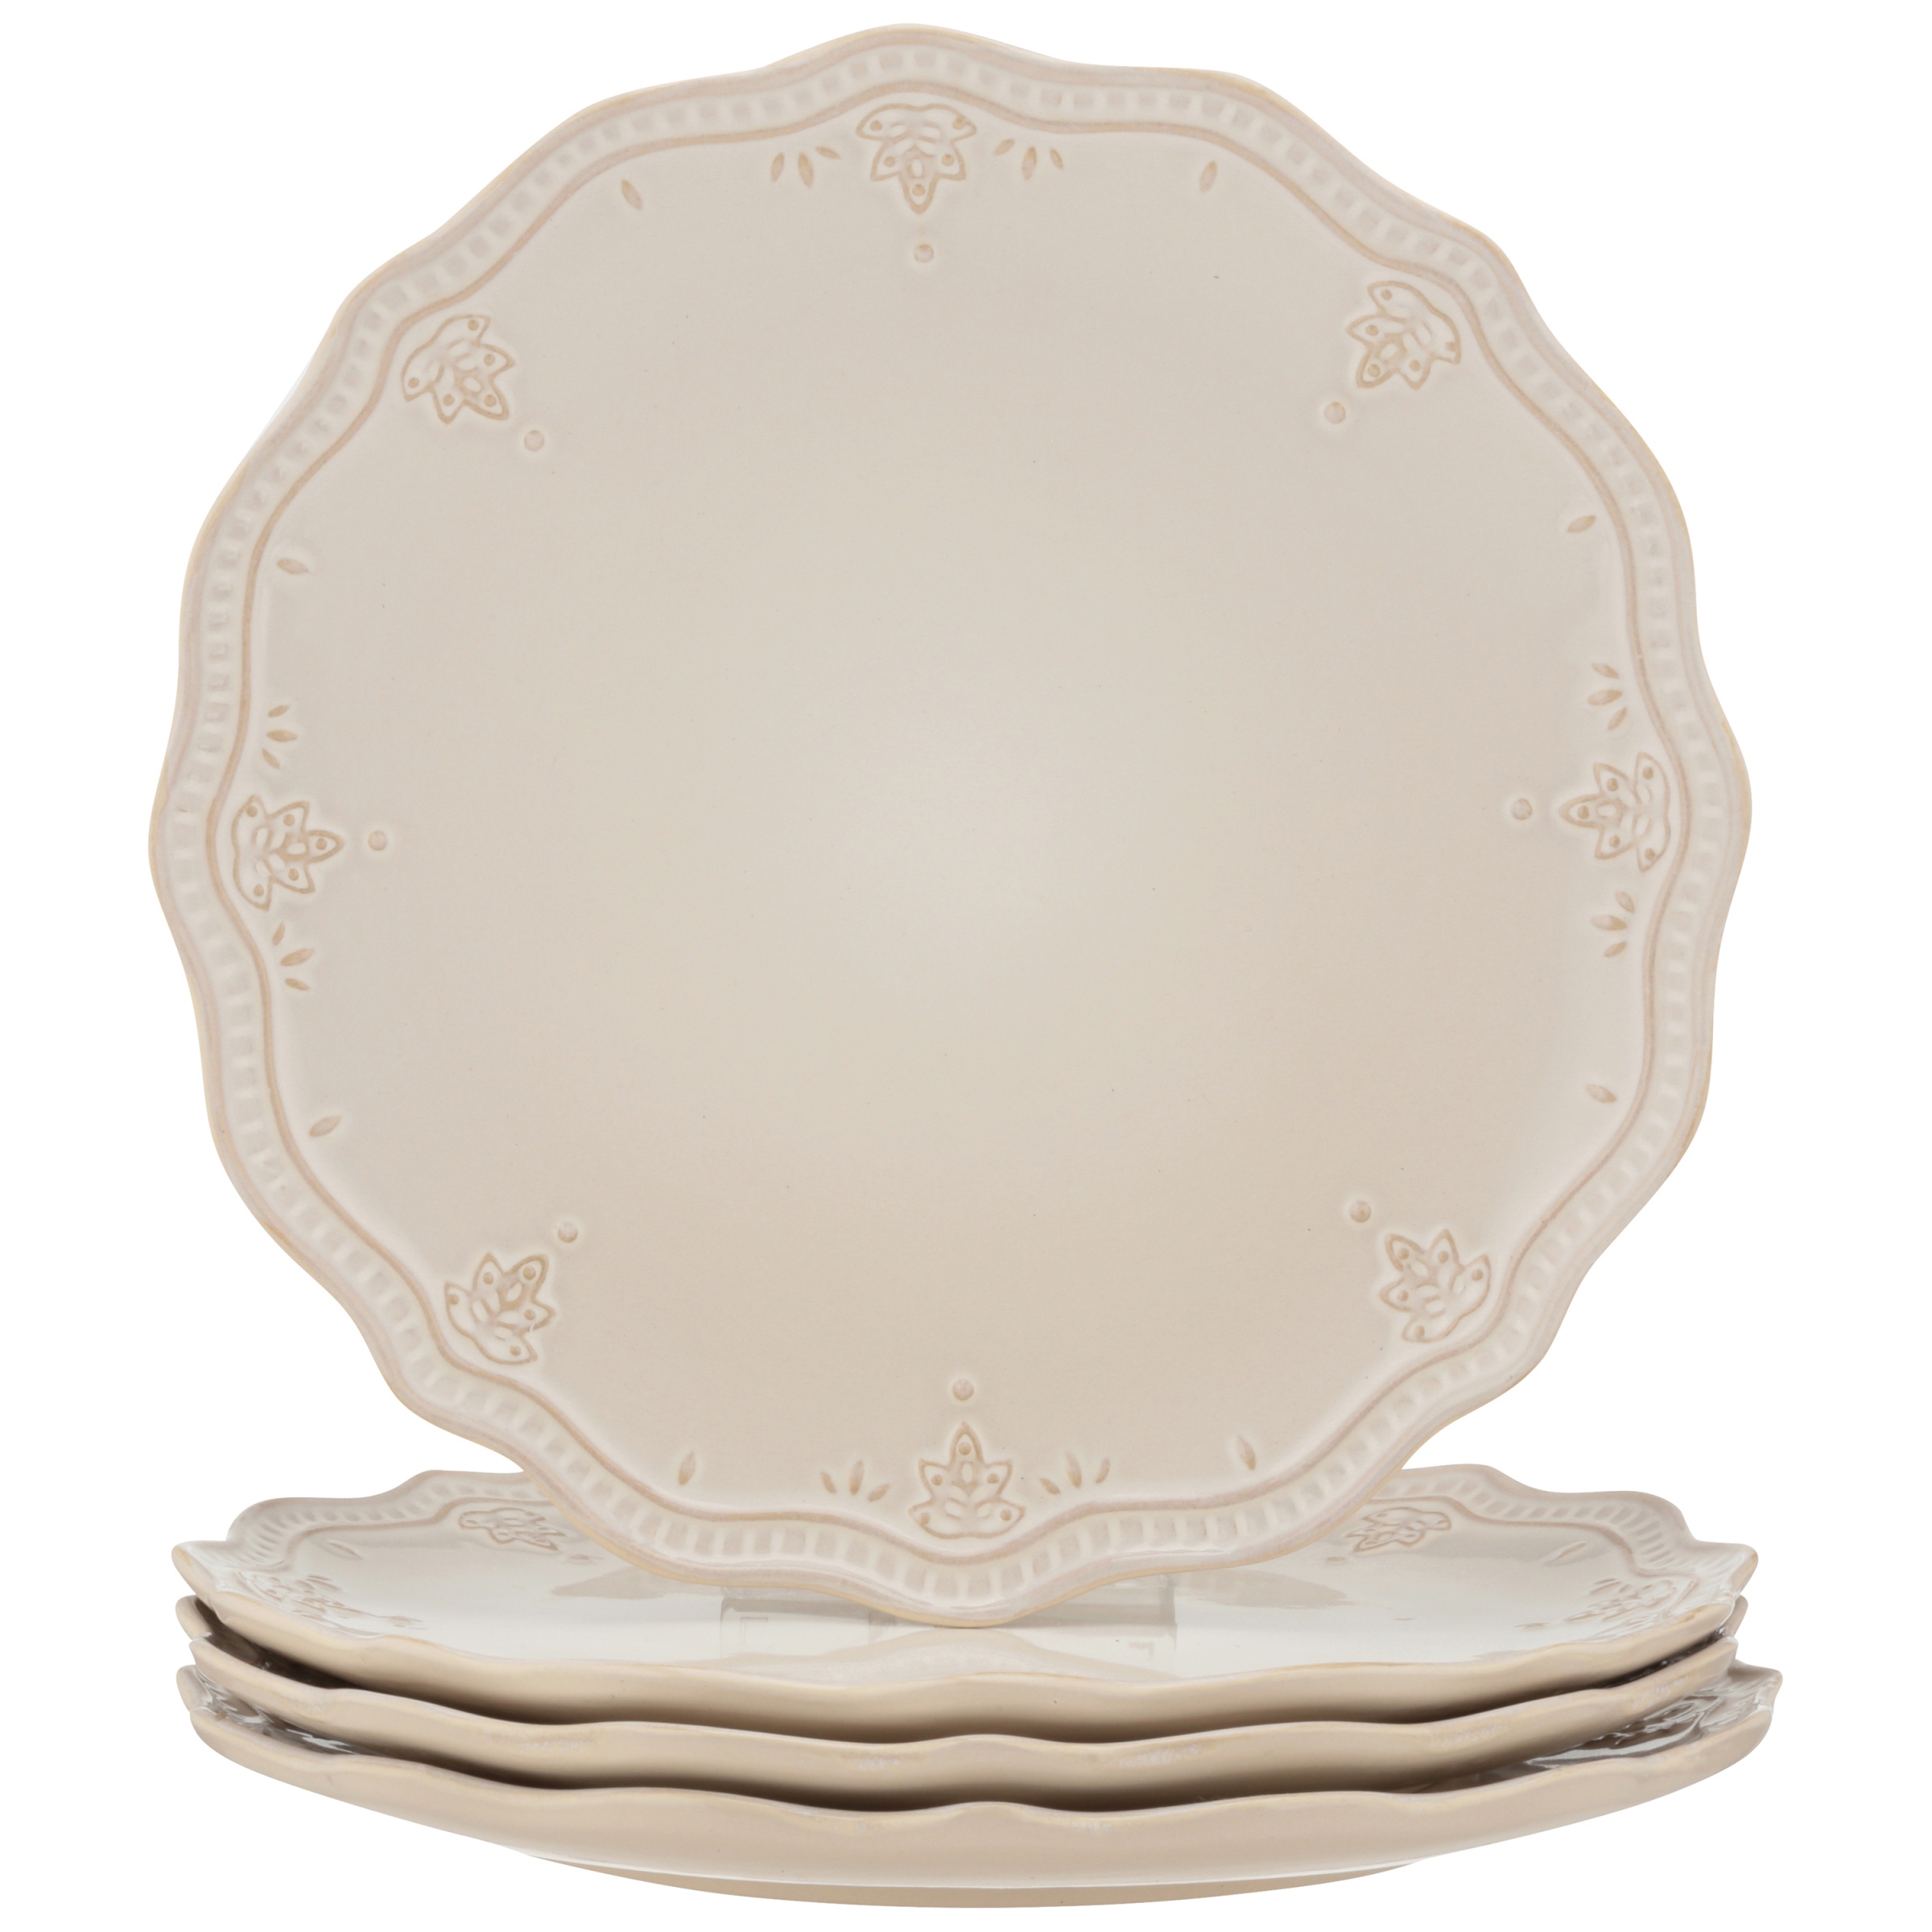 The Pioneer Woman Farmhouse Lace 4-Piece Dinner Plate Set - image 1 of 4